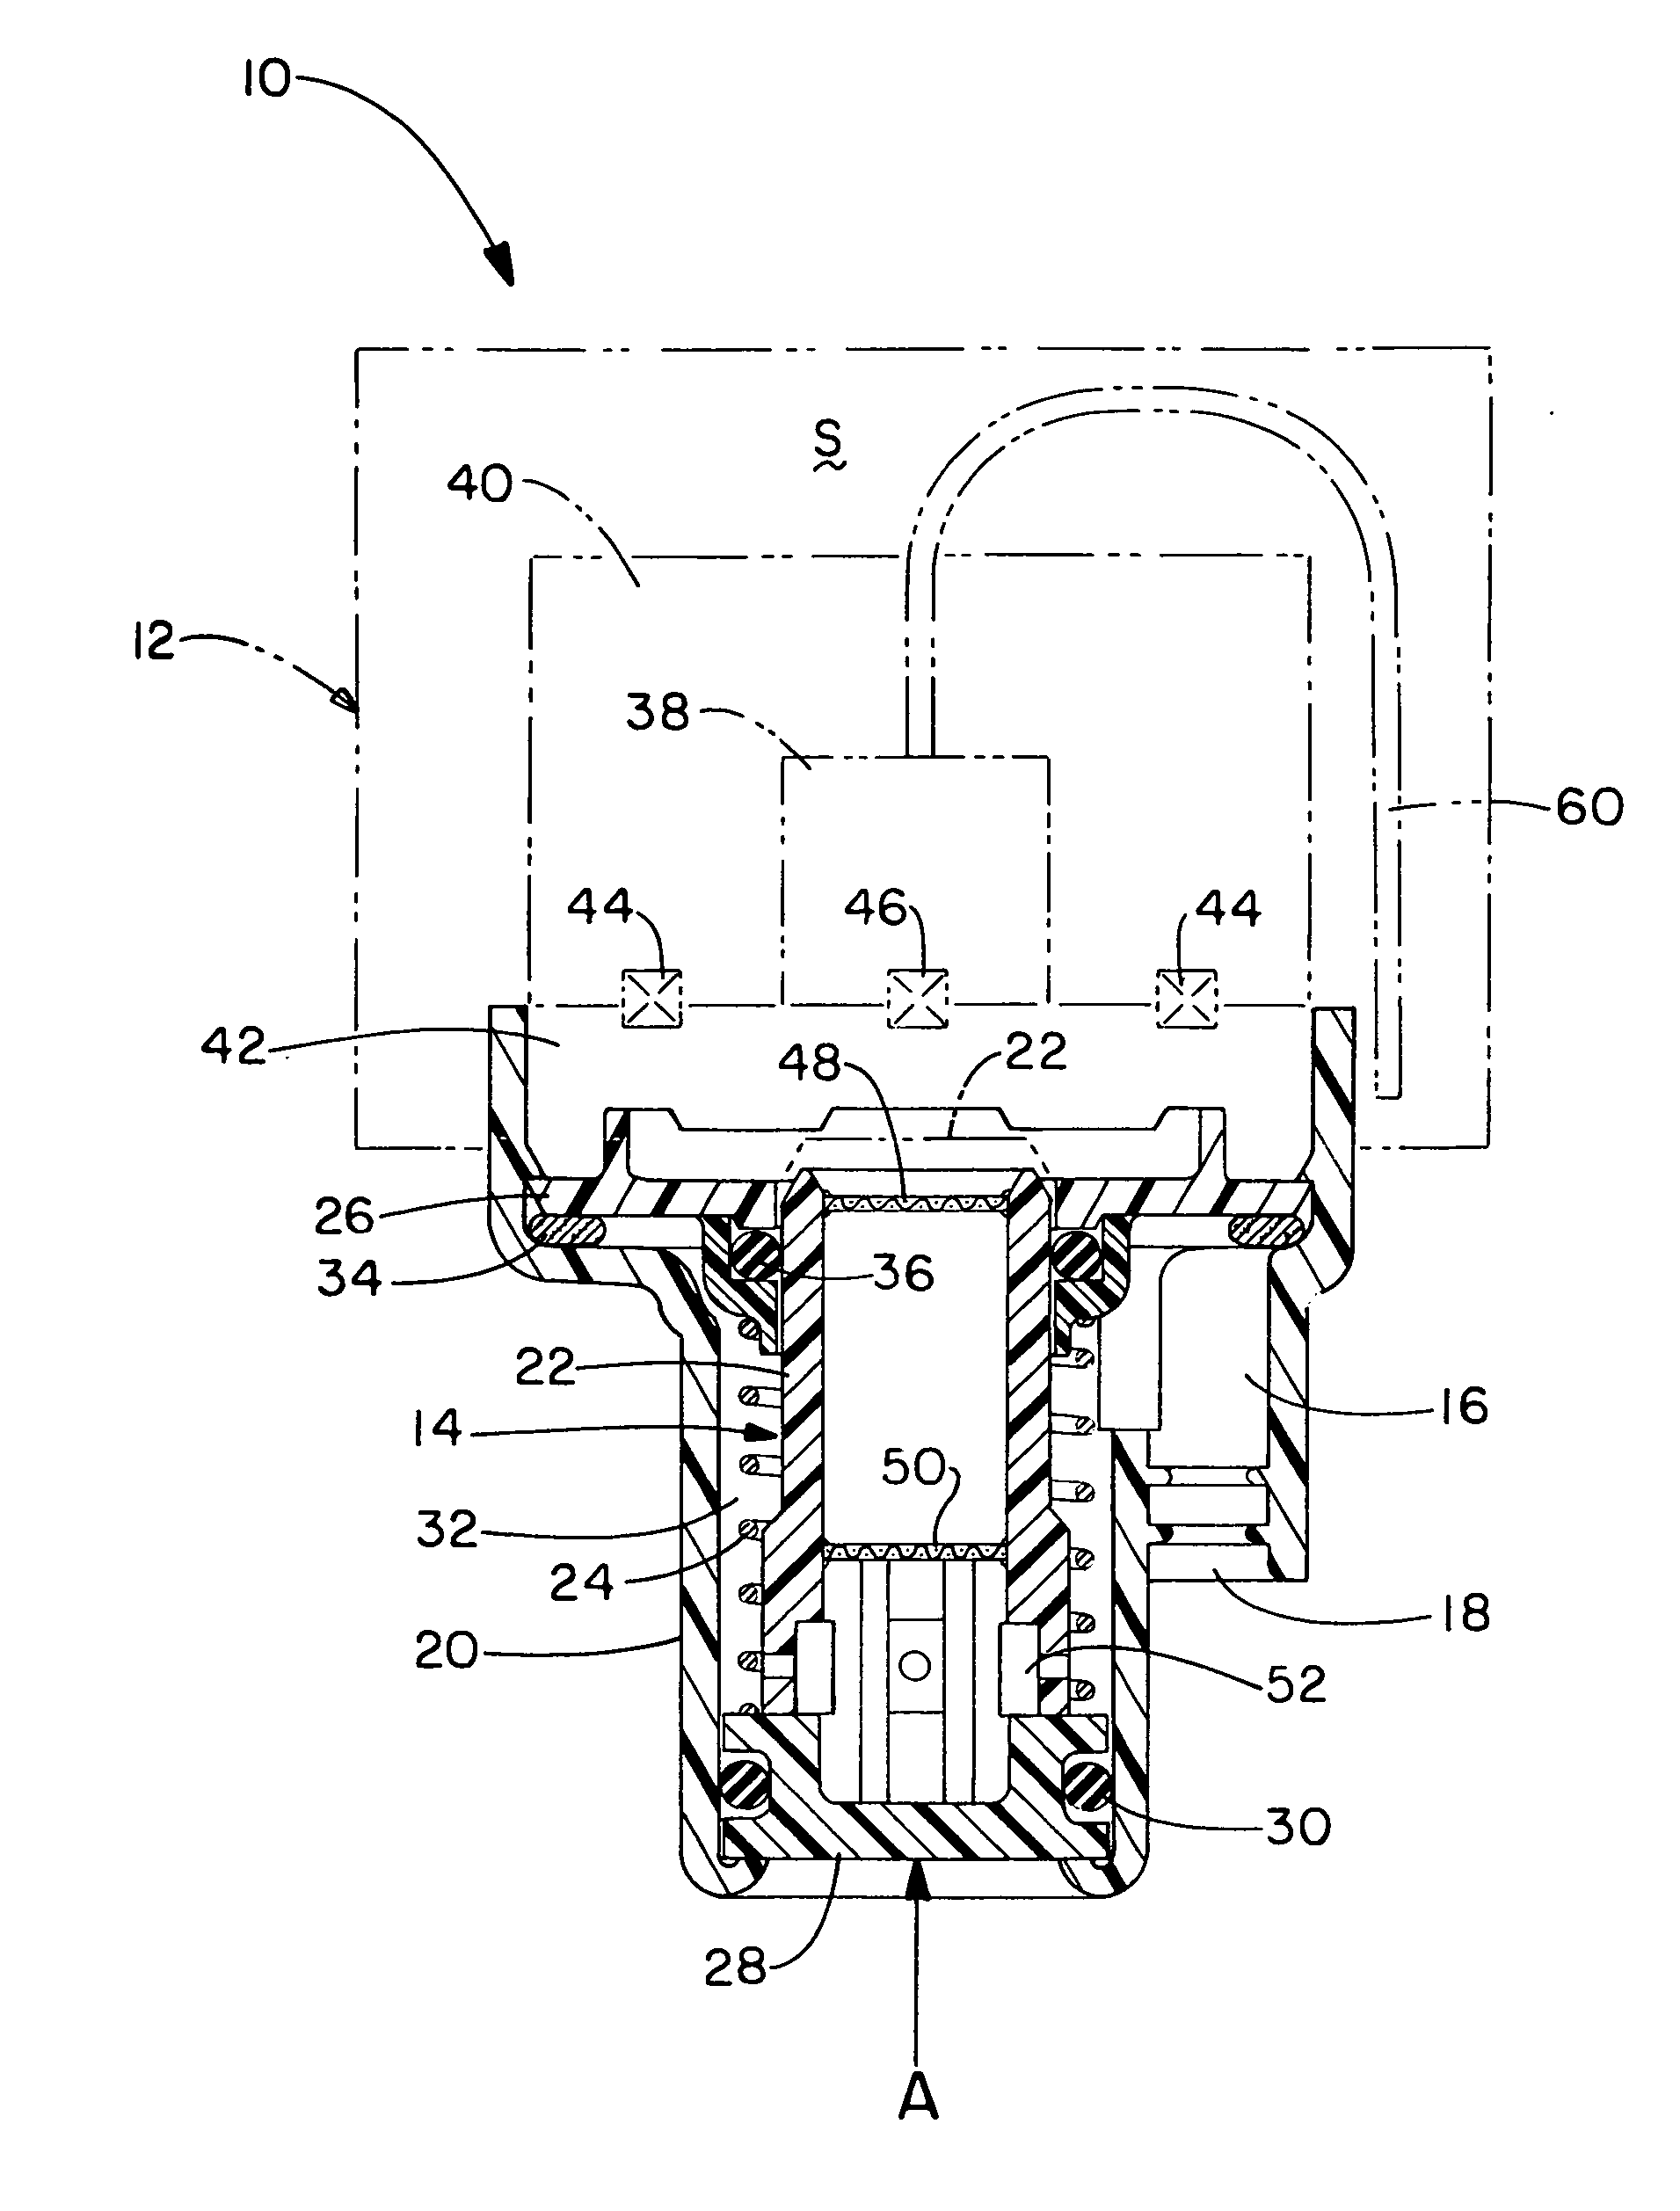 Dispenser with suction chamber